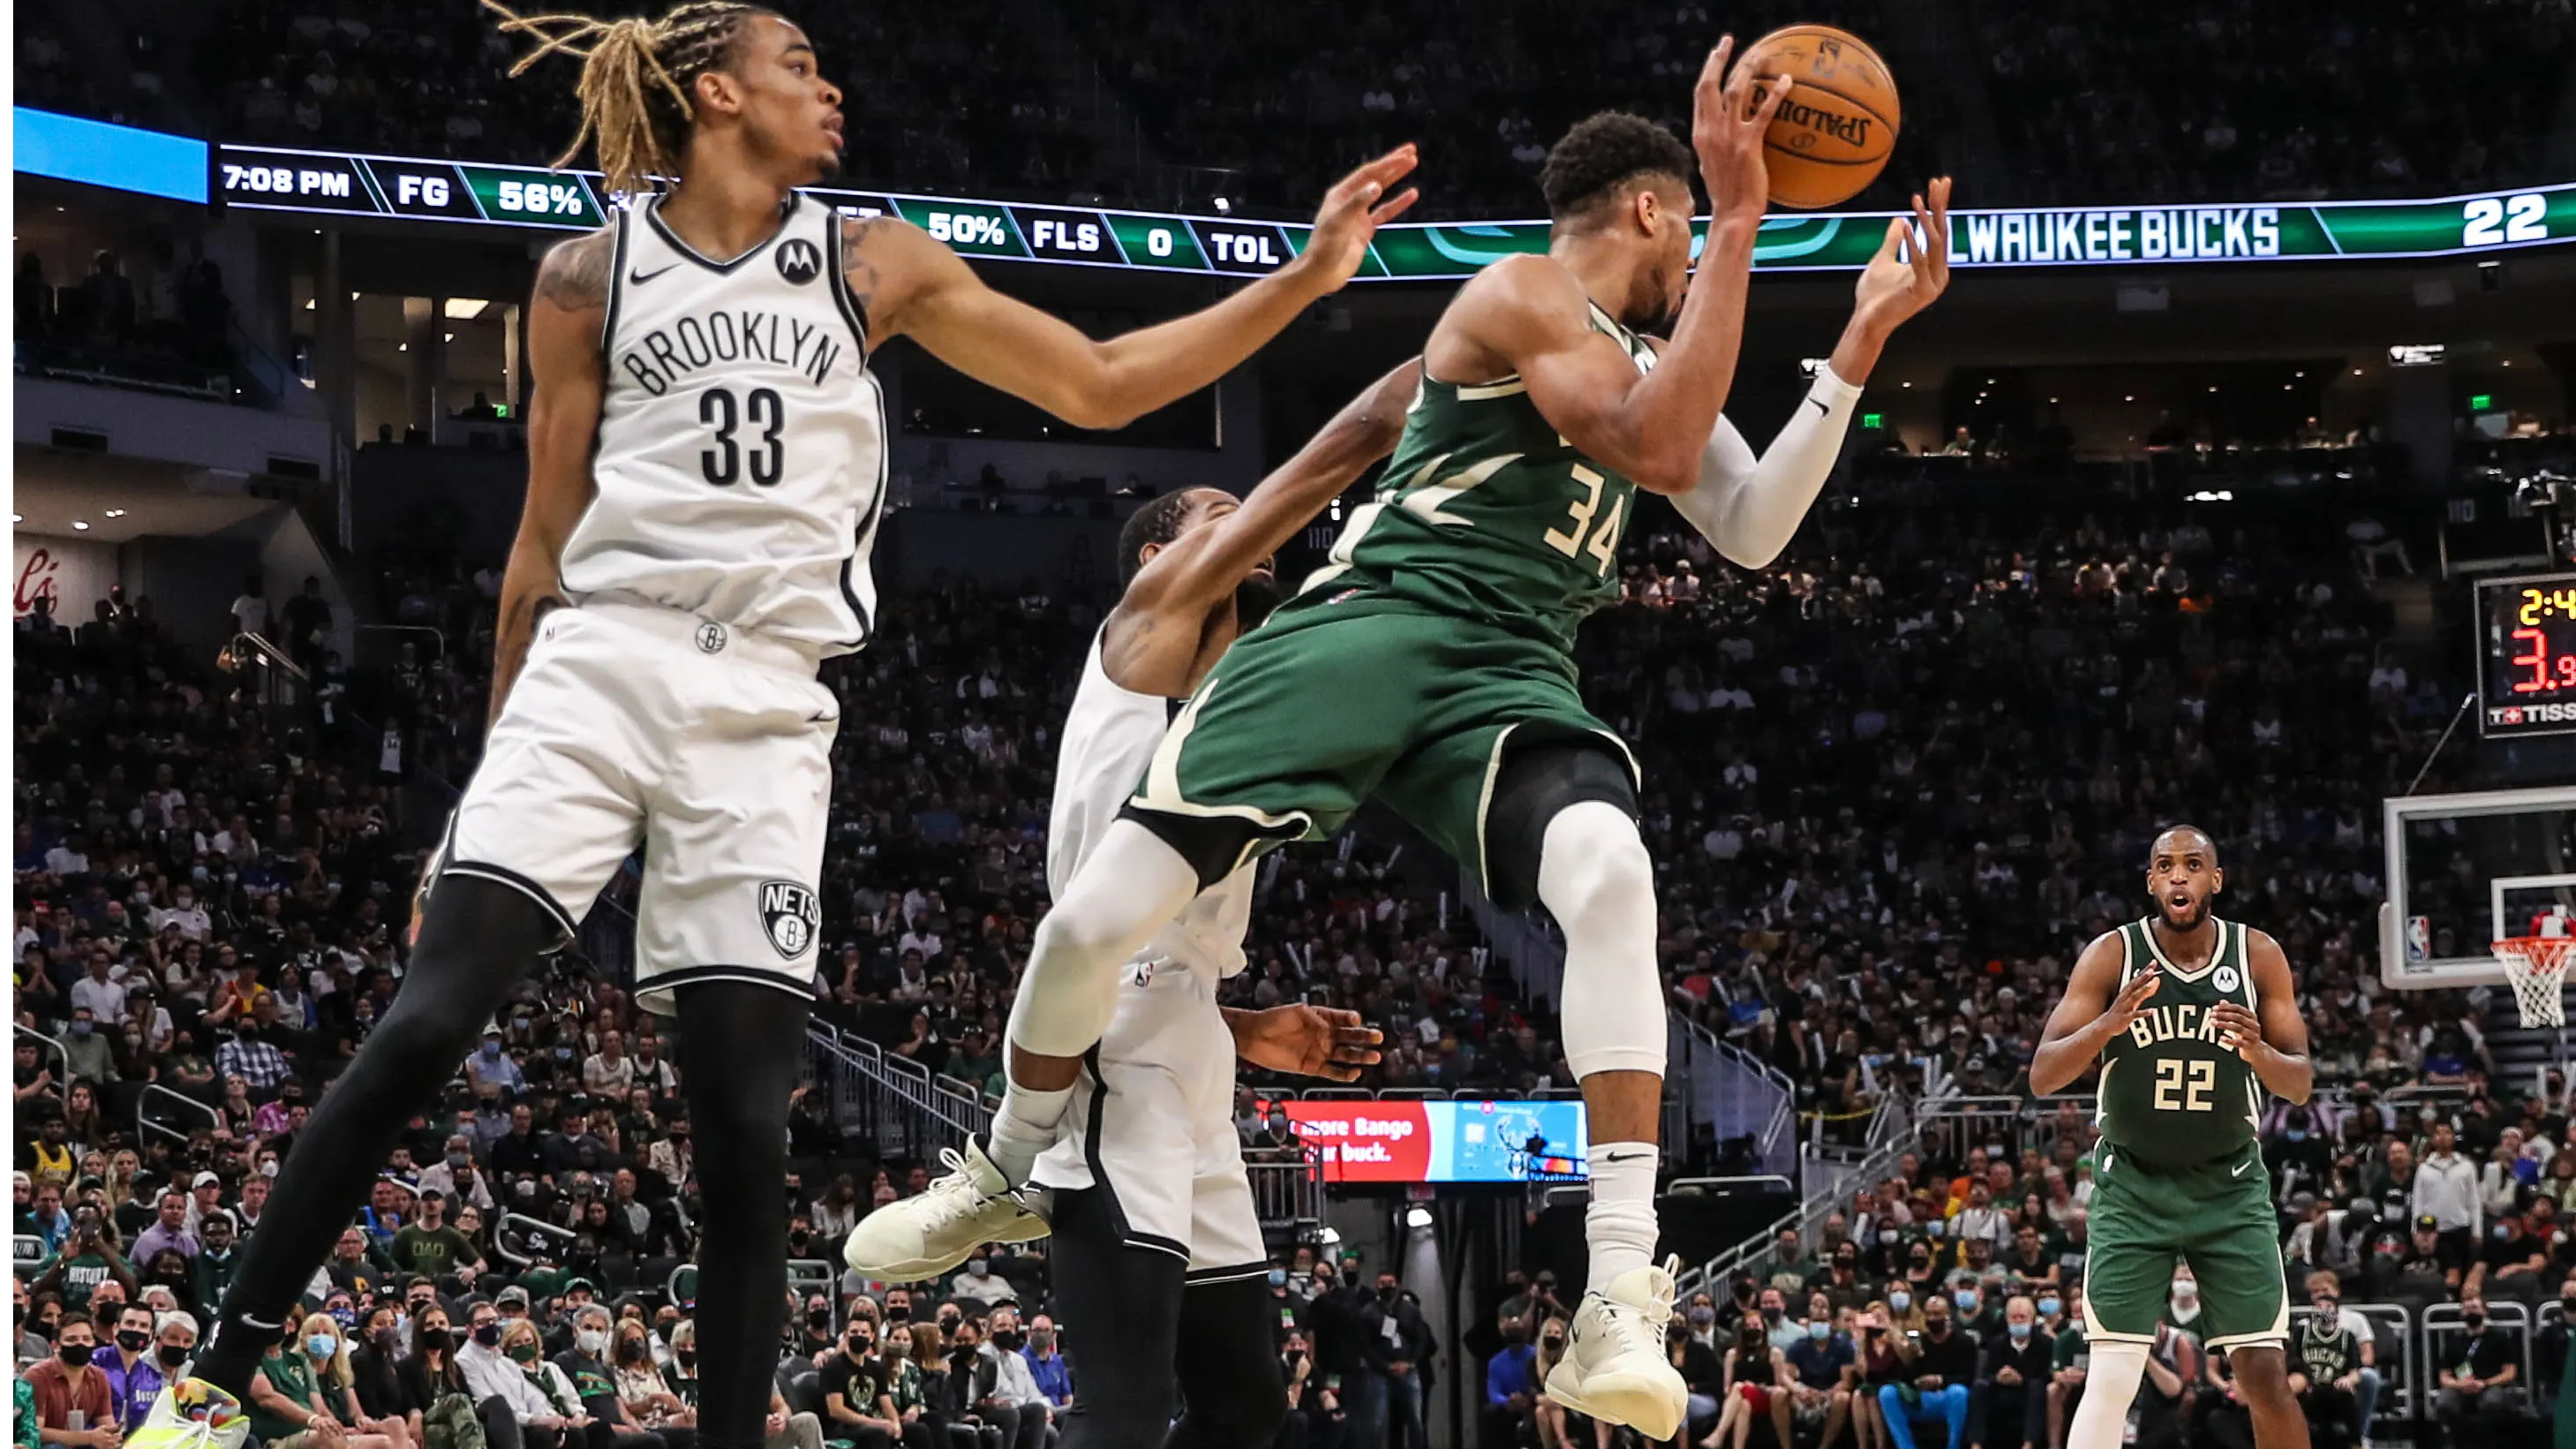 Milwaukee Bucks lead wire-to-wire to beat Brooklyn Nets, force decisive game seven